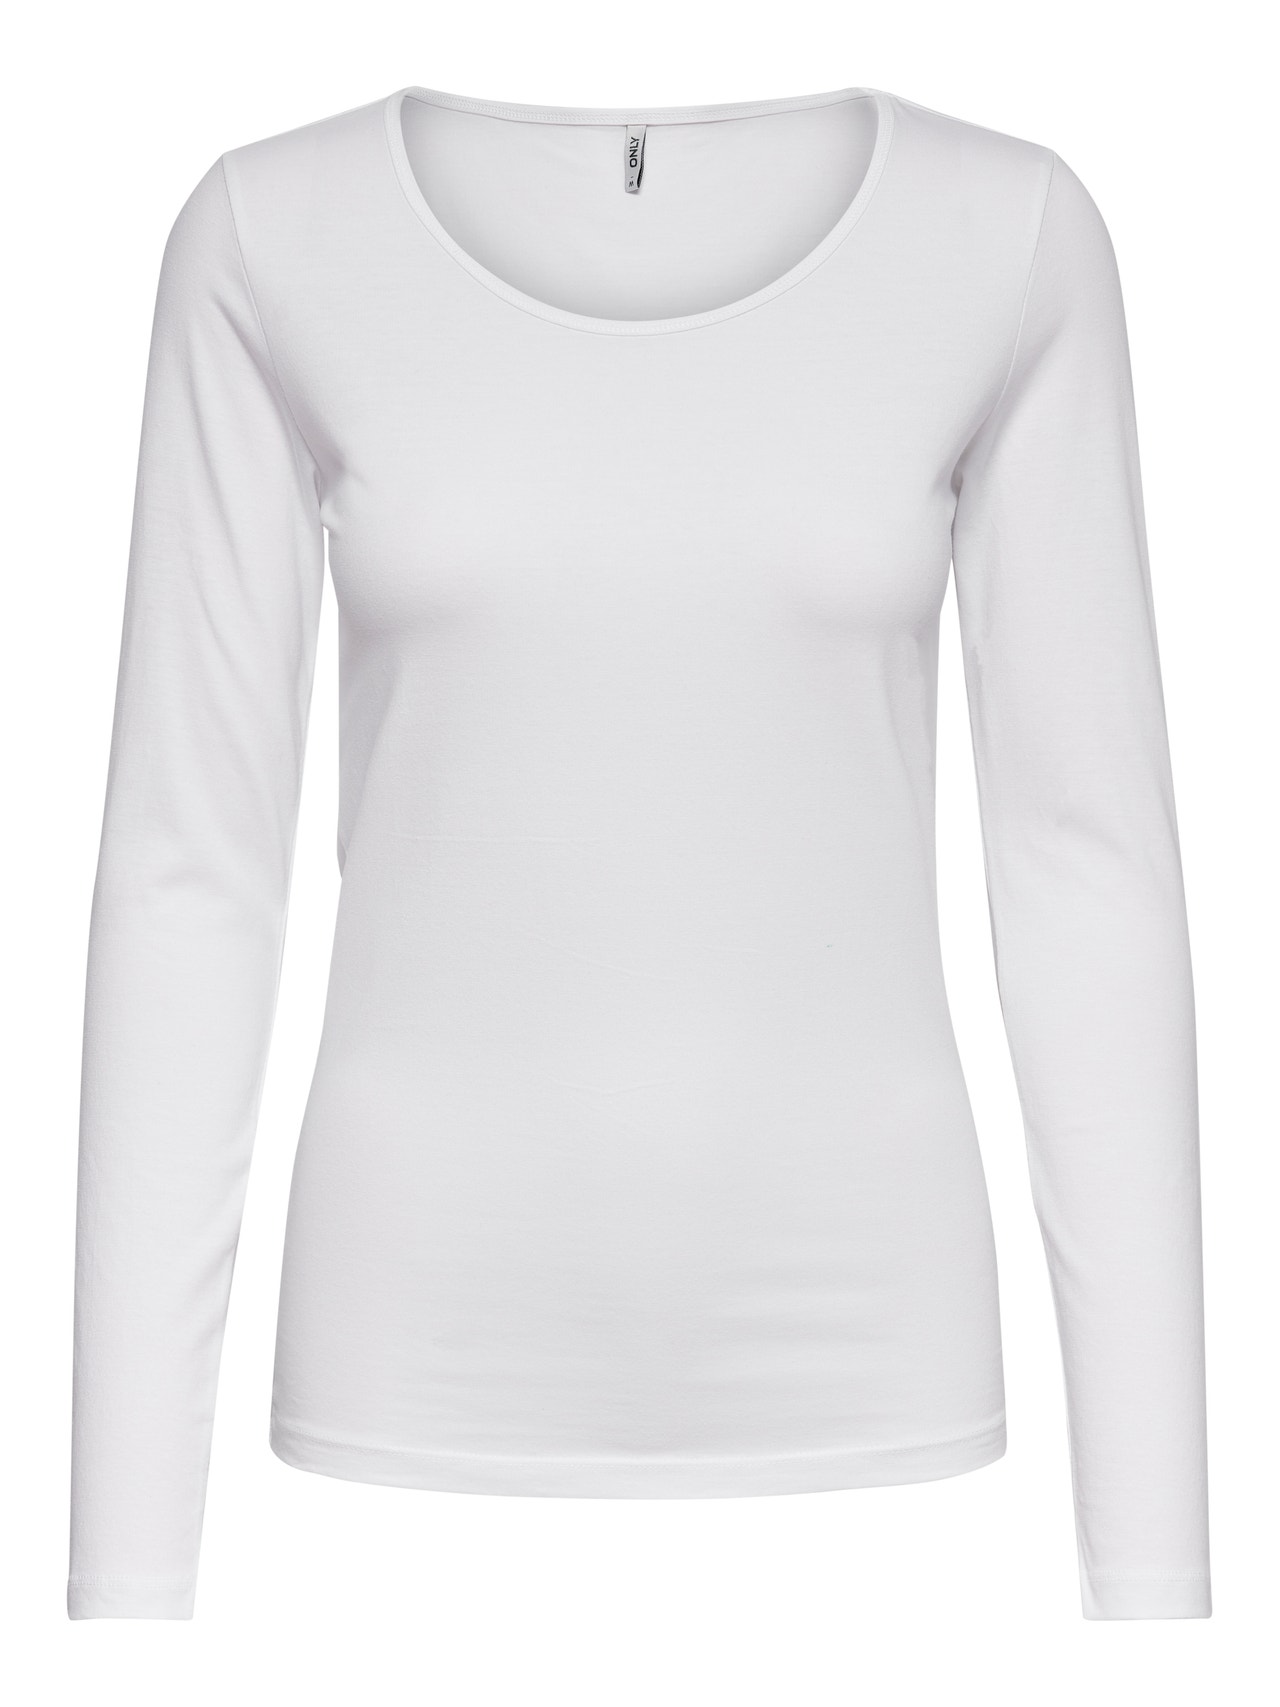 ONLY Basis Top -White - 15204712